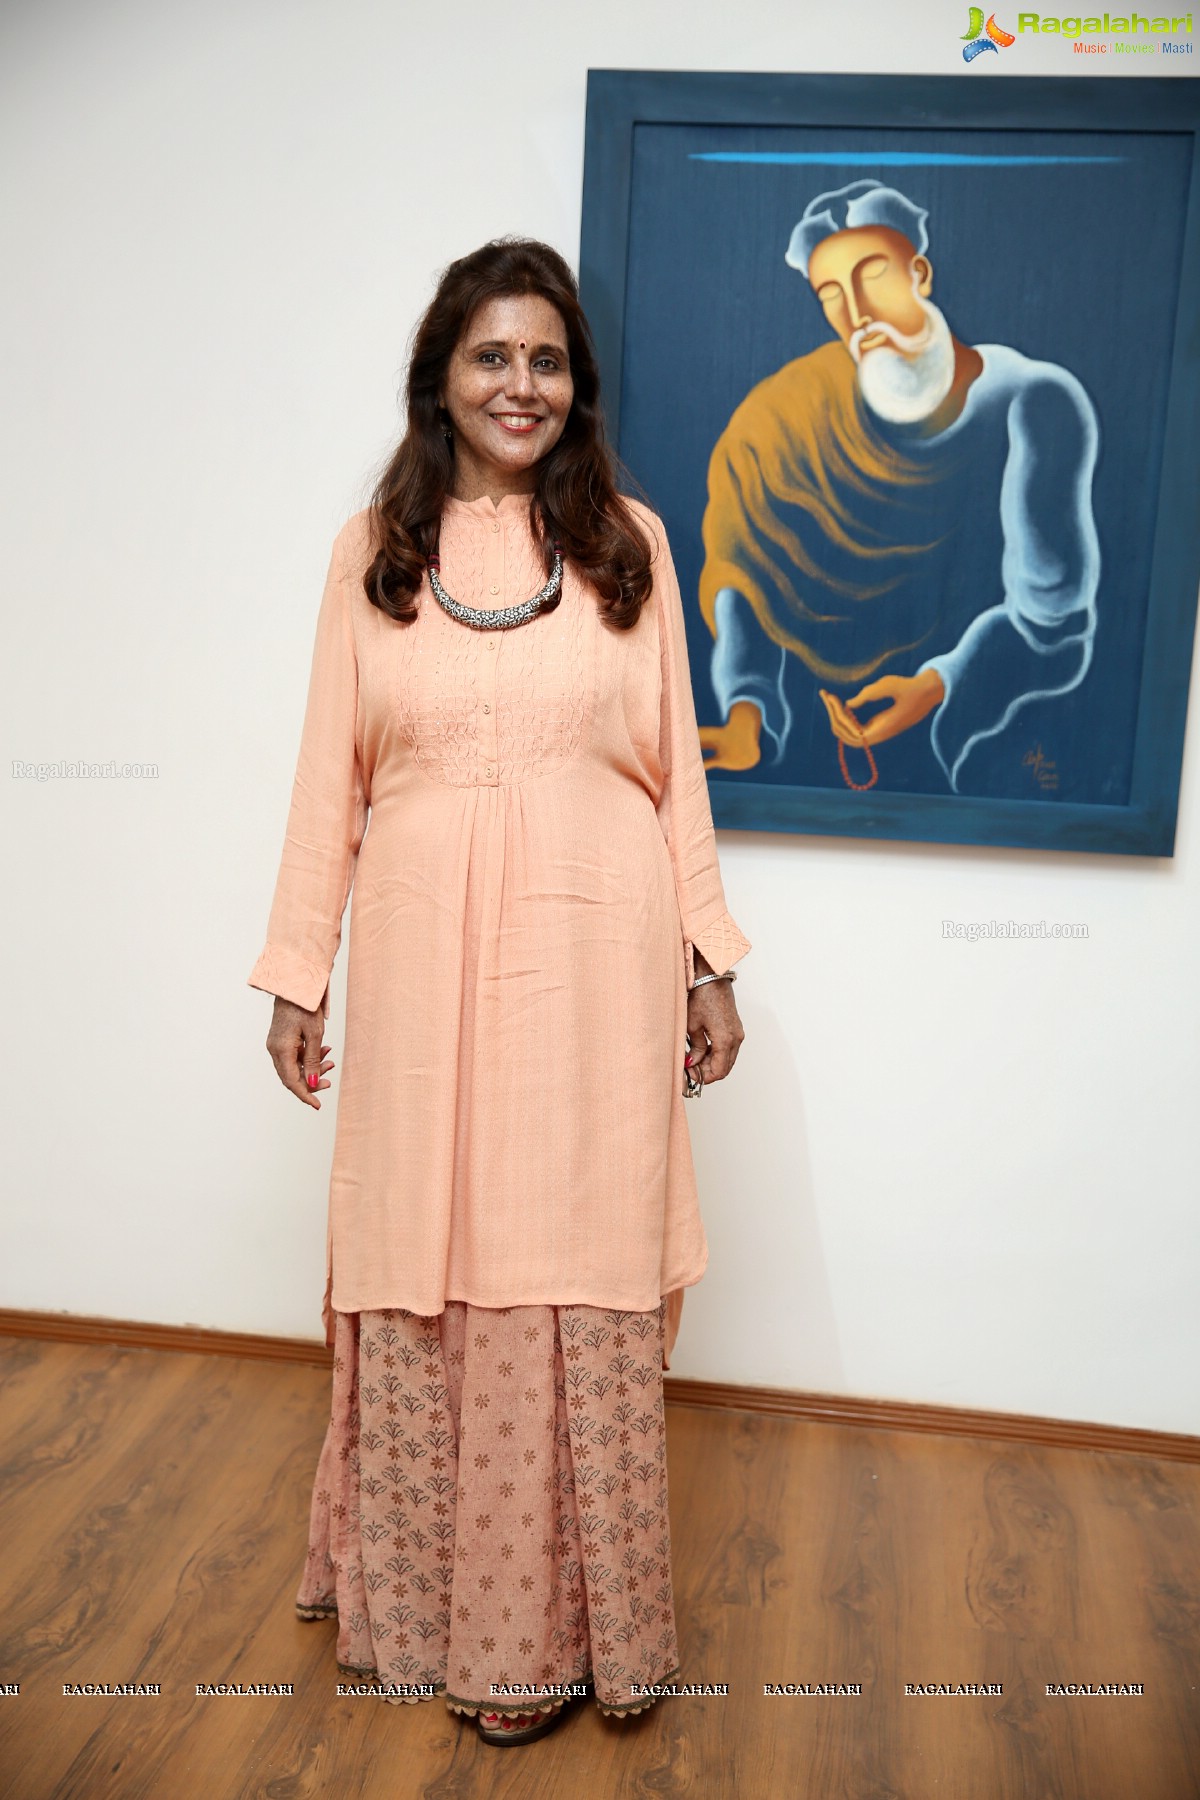 The Theatre of Absorption - An Art Exhibition at Kalakriti Art Gallery